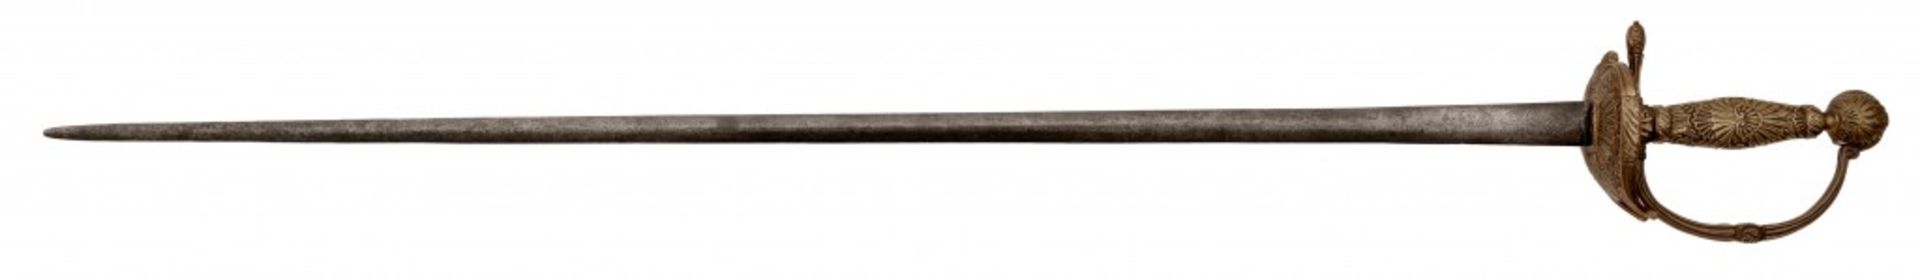 A Small-Sword - Image 5 of 7